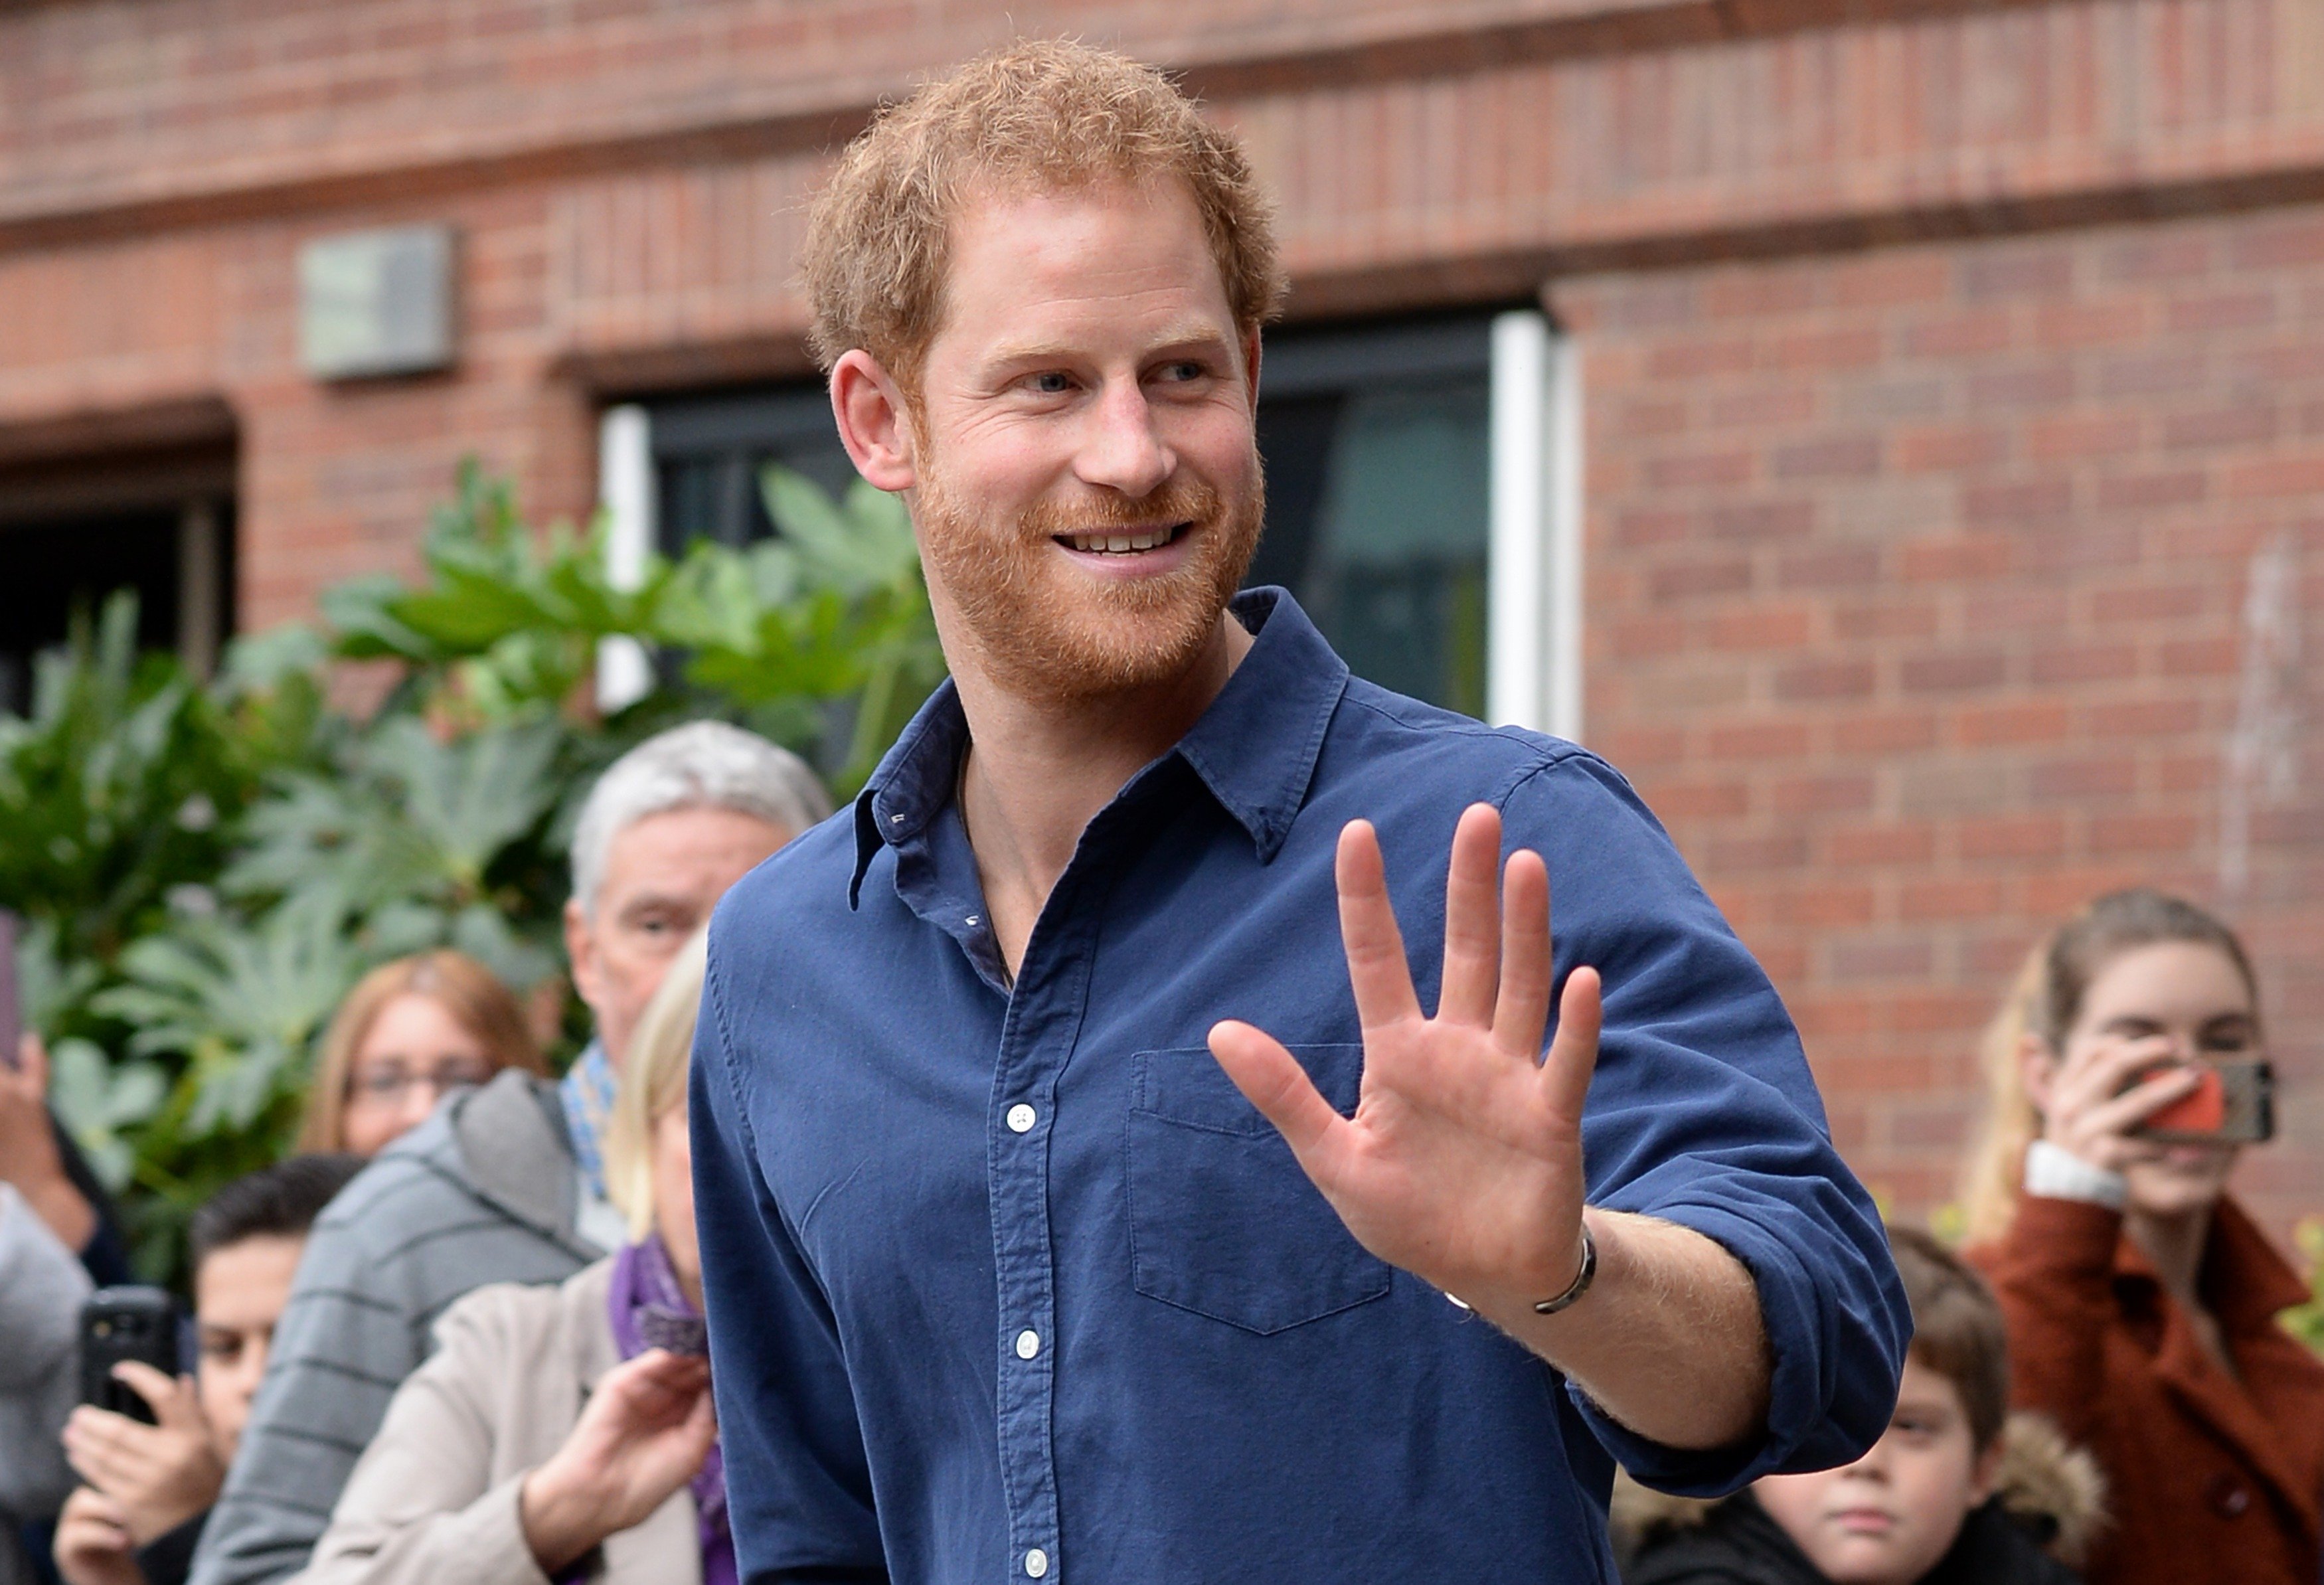 Prince Harry waving while leaving Nottingham's new Central Police Station, 2016, Nottingham, England. | Photo: Getty Images